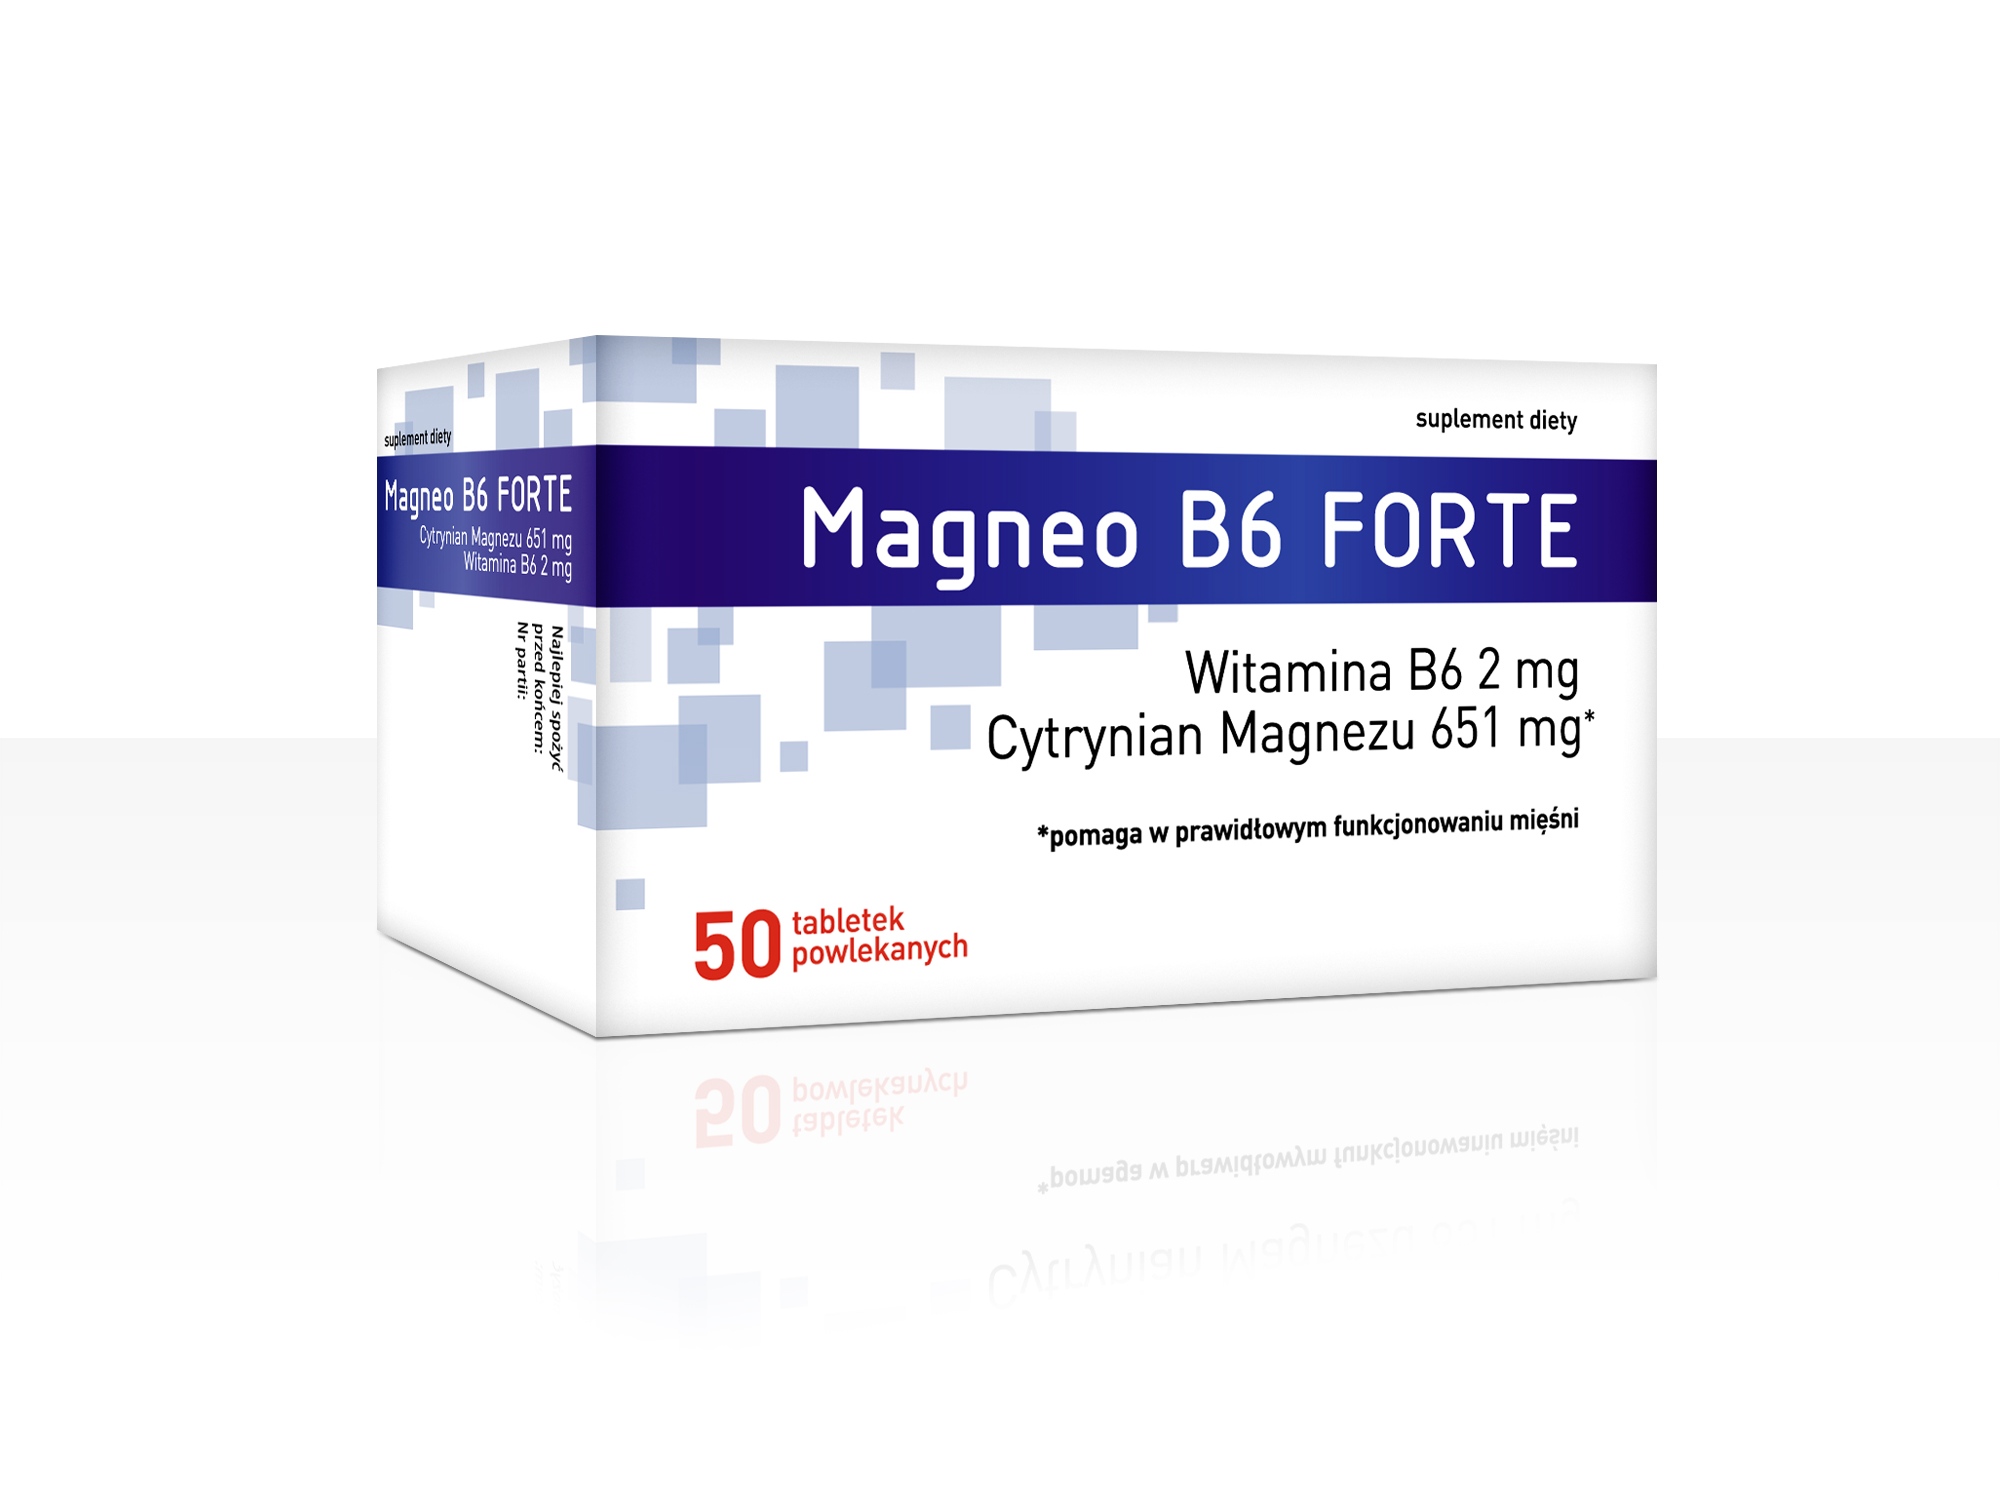 Magneo B6 Forte